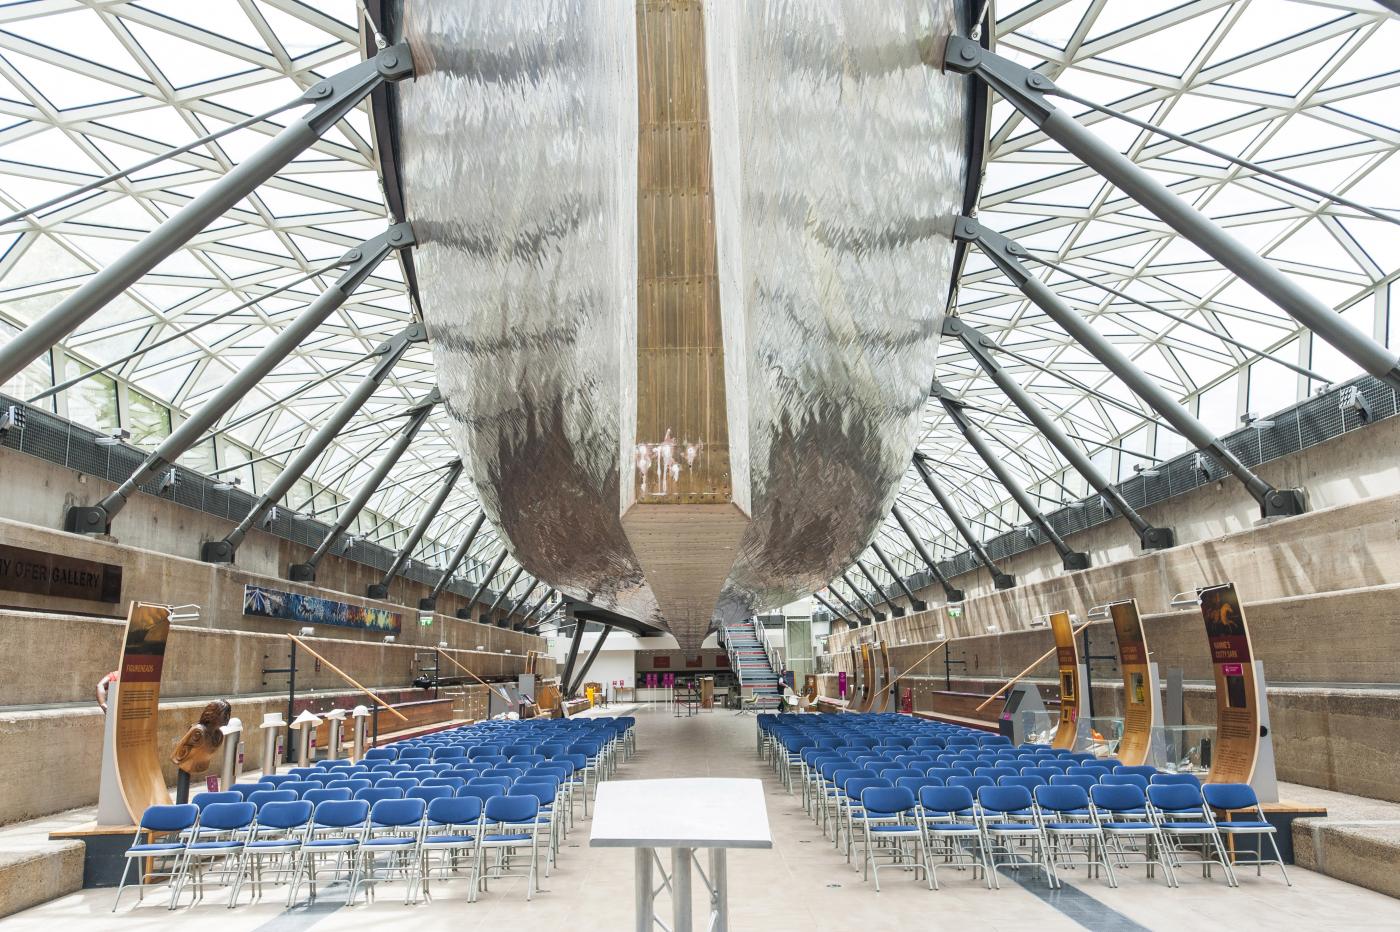 An image showing 'Cutty Sark '